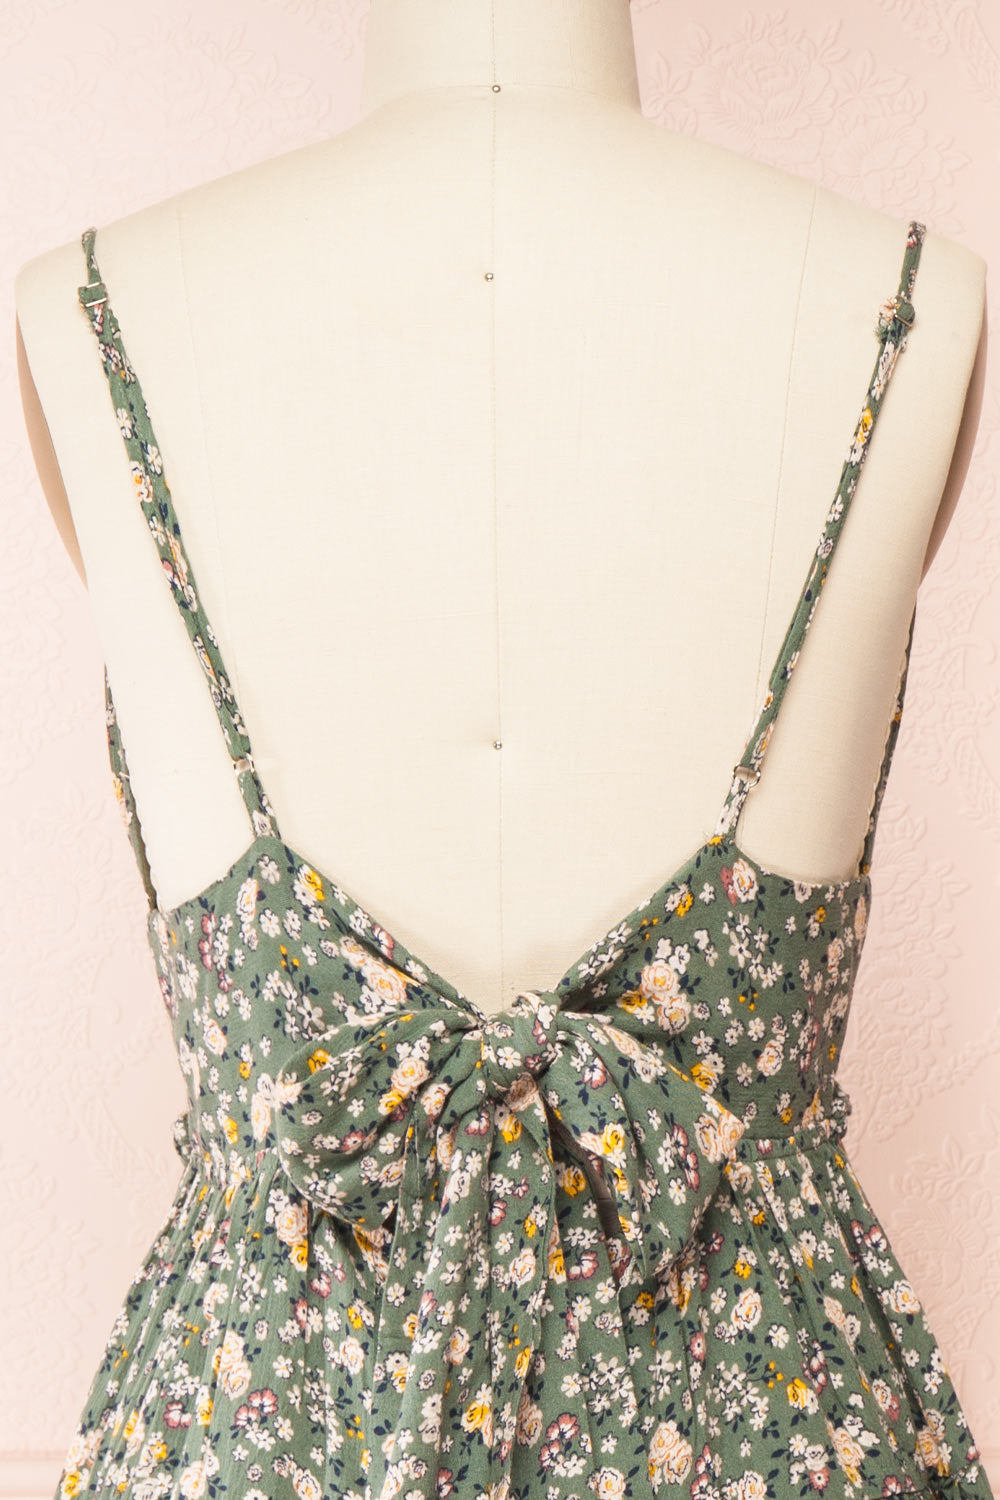 Hillevi Tie-Back Floral Romper with Ruffles | Boutique 1861 back close-up